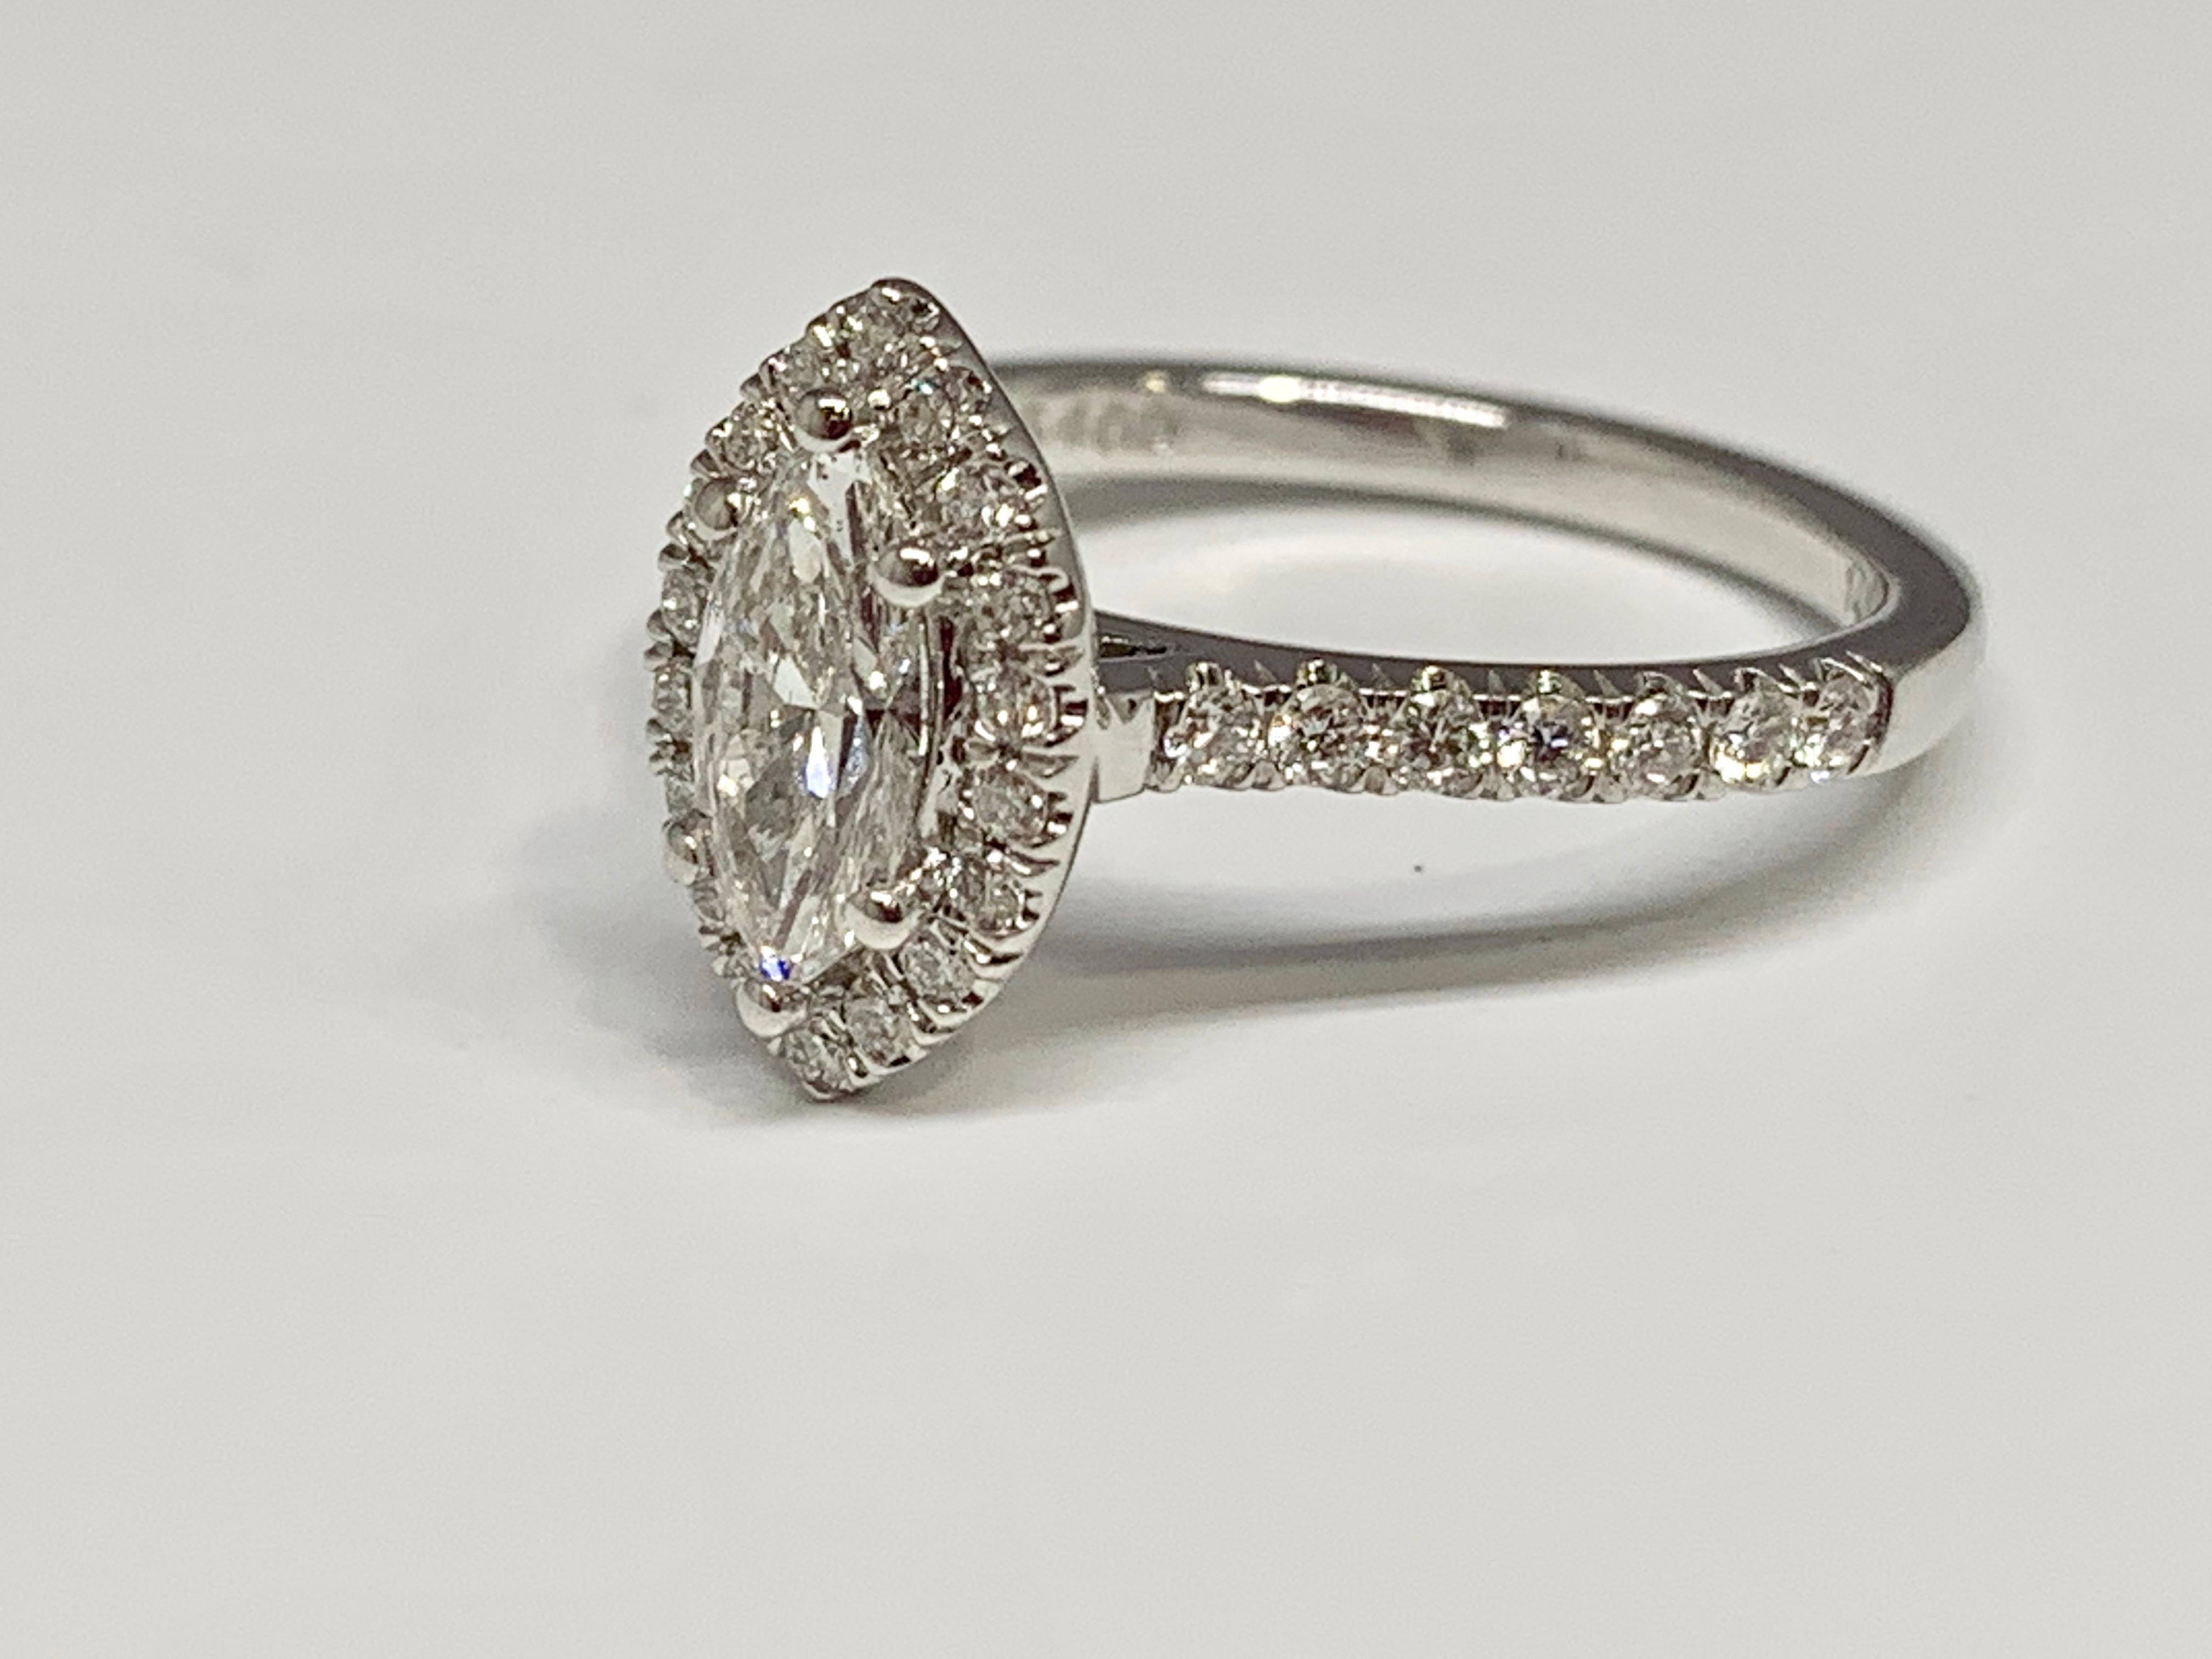 This vintage inspired engagement ring from Martin Flyer features a 0.51 carat Marquise center diamond that is GIA certified. The color grade of the center diamond is E and the clarity grade is SI2. The size 6.5 micro pave mounting is made of 14K